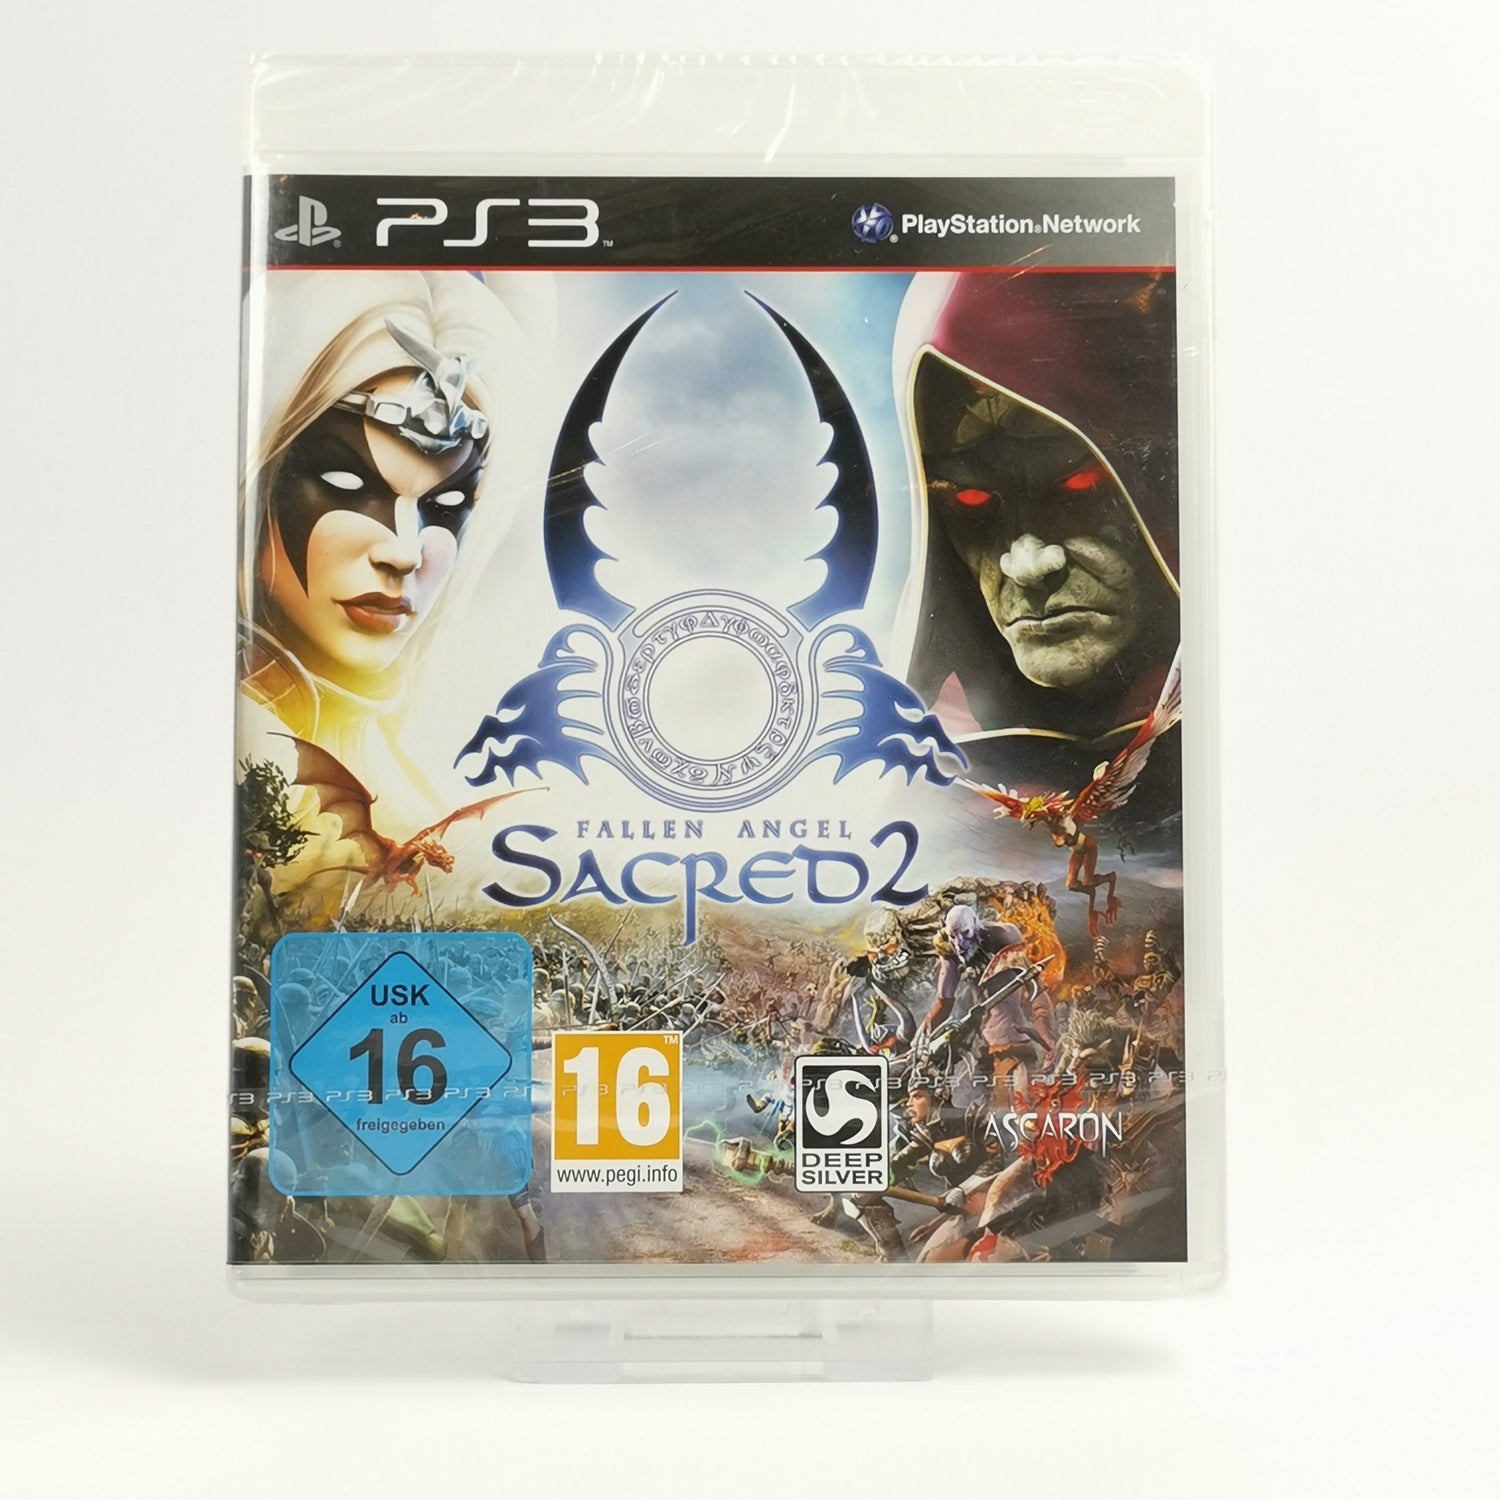 Sony Playstation 3 Game: Sacred 2 Fallen Angel | Original packaging PS3 game - NEW NEW SEALED